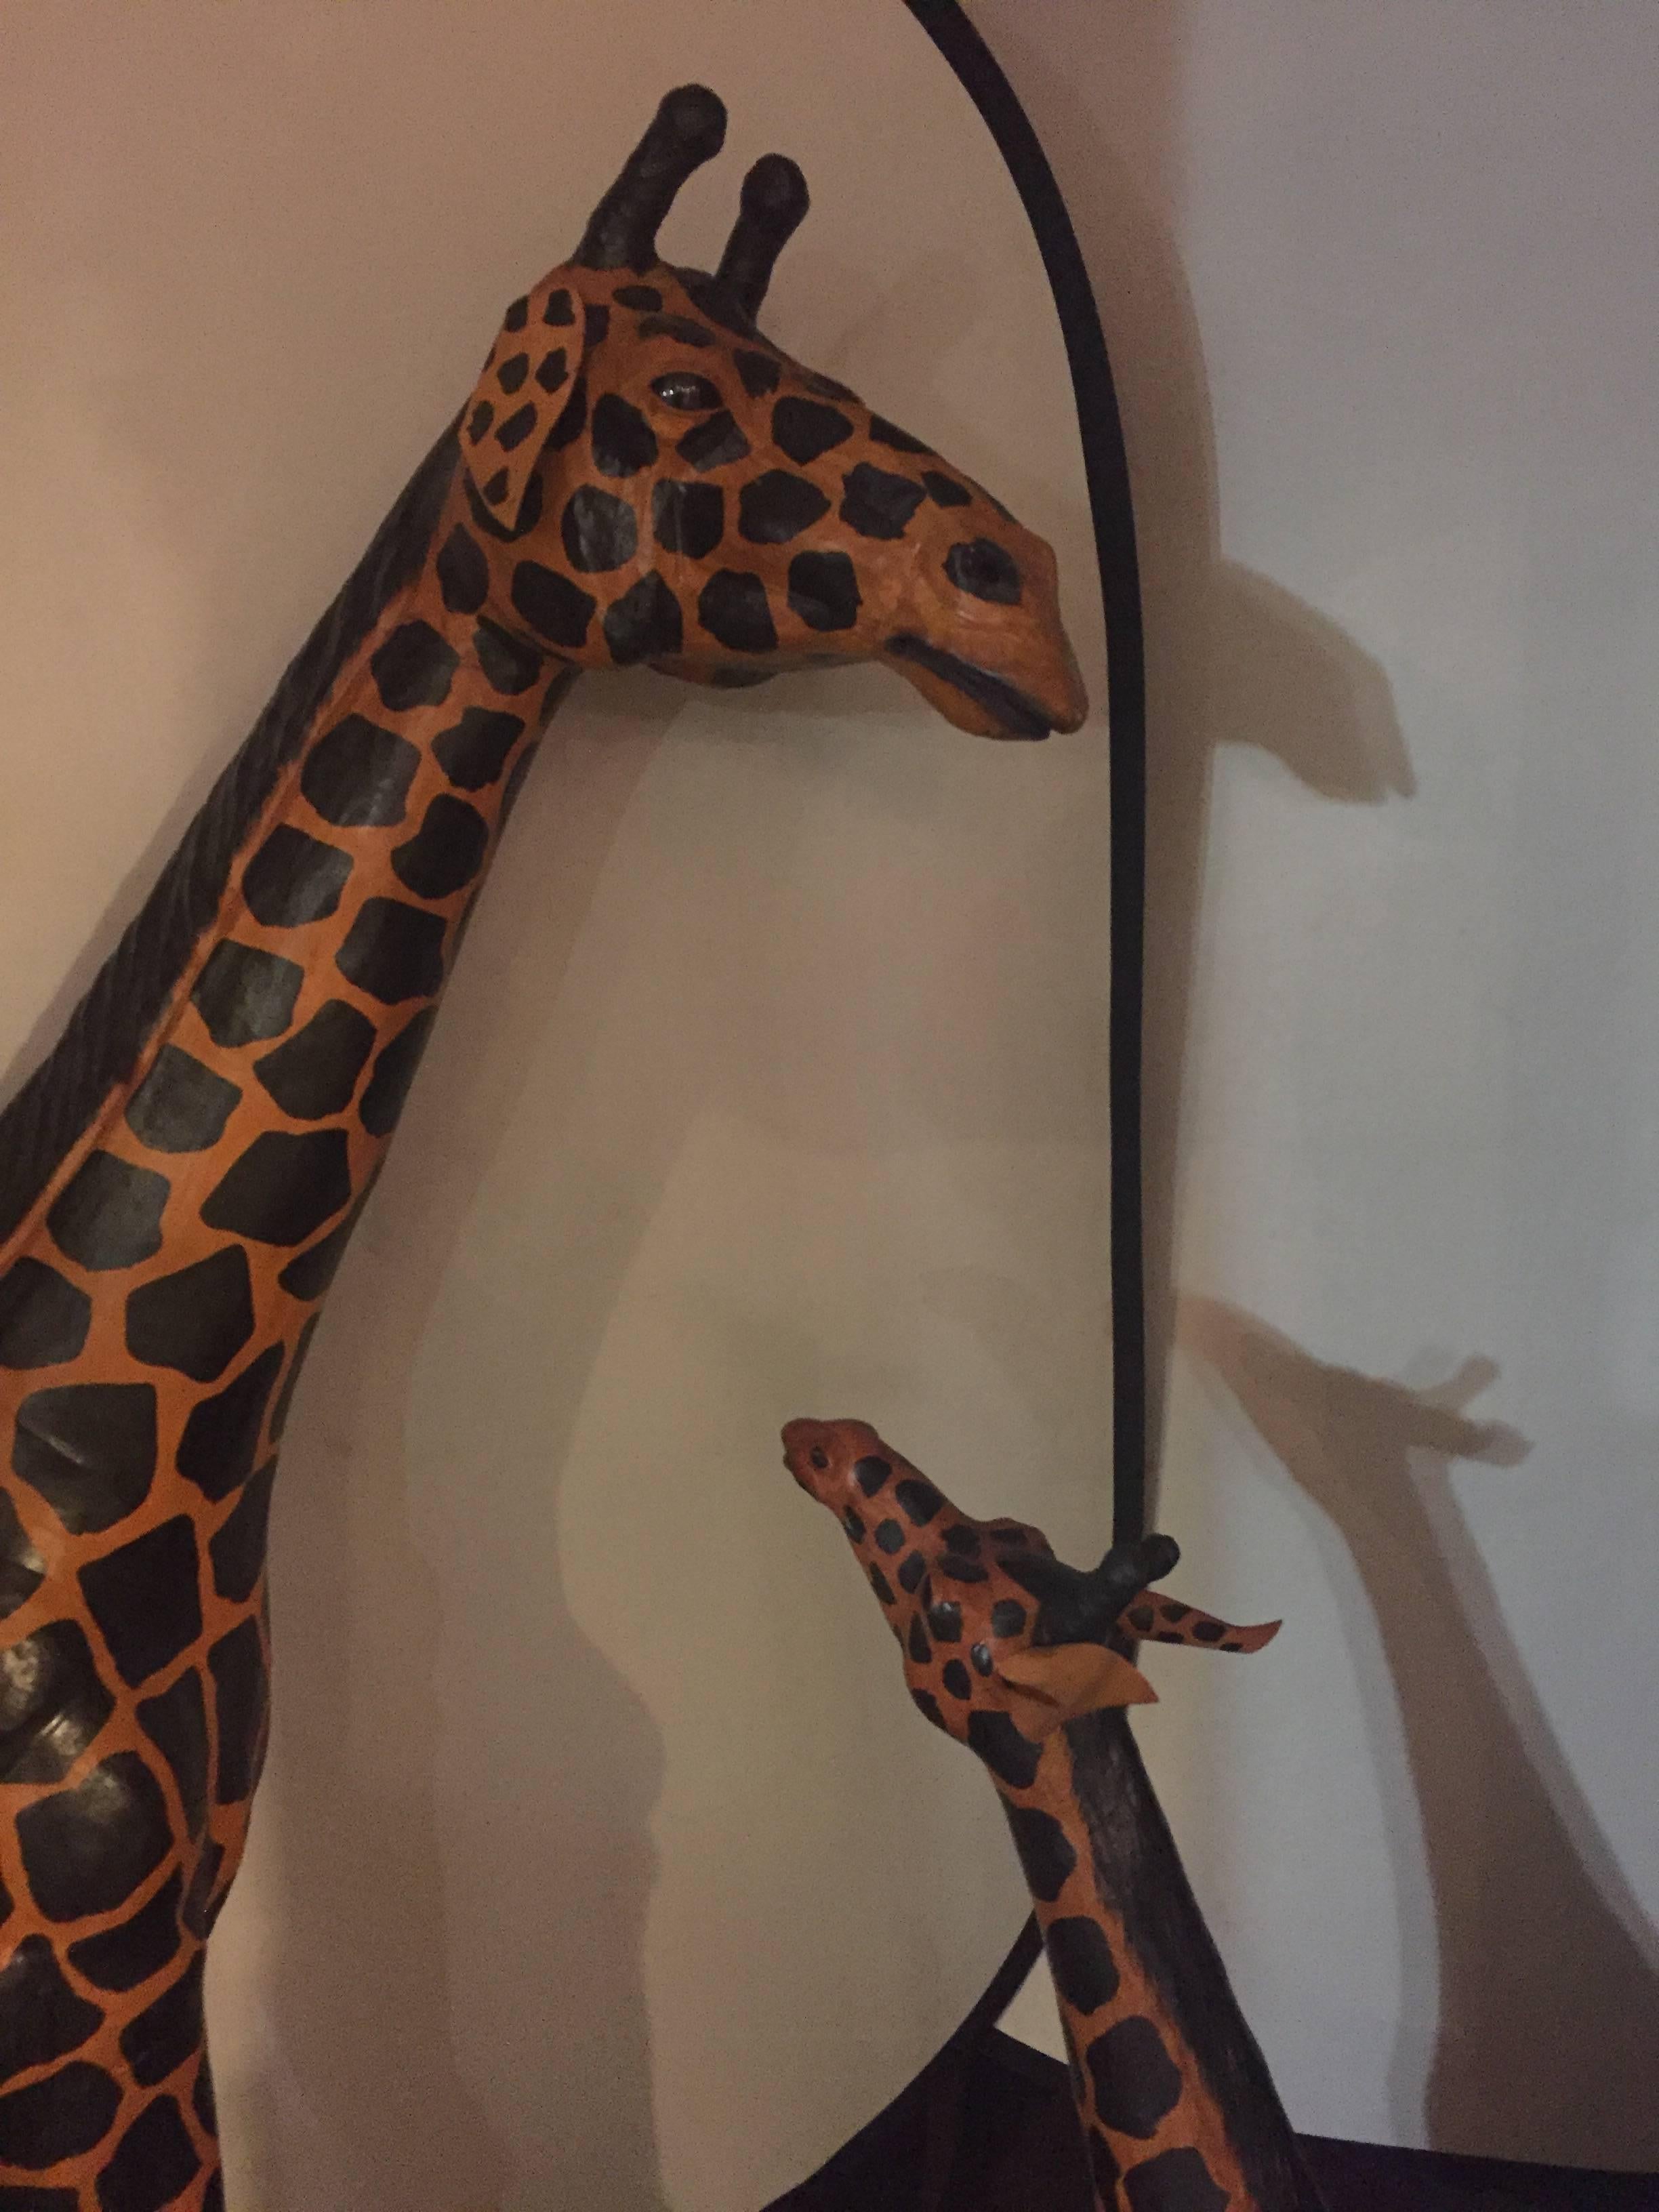 A pair of life-size giraffes each made of painted leather. This wonderfully lifelike monumental giraffes are sure to spark conversation in any room in the home or office. Can purchase one or the pair however, we would like to keep the family